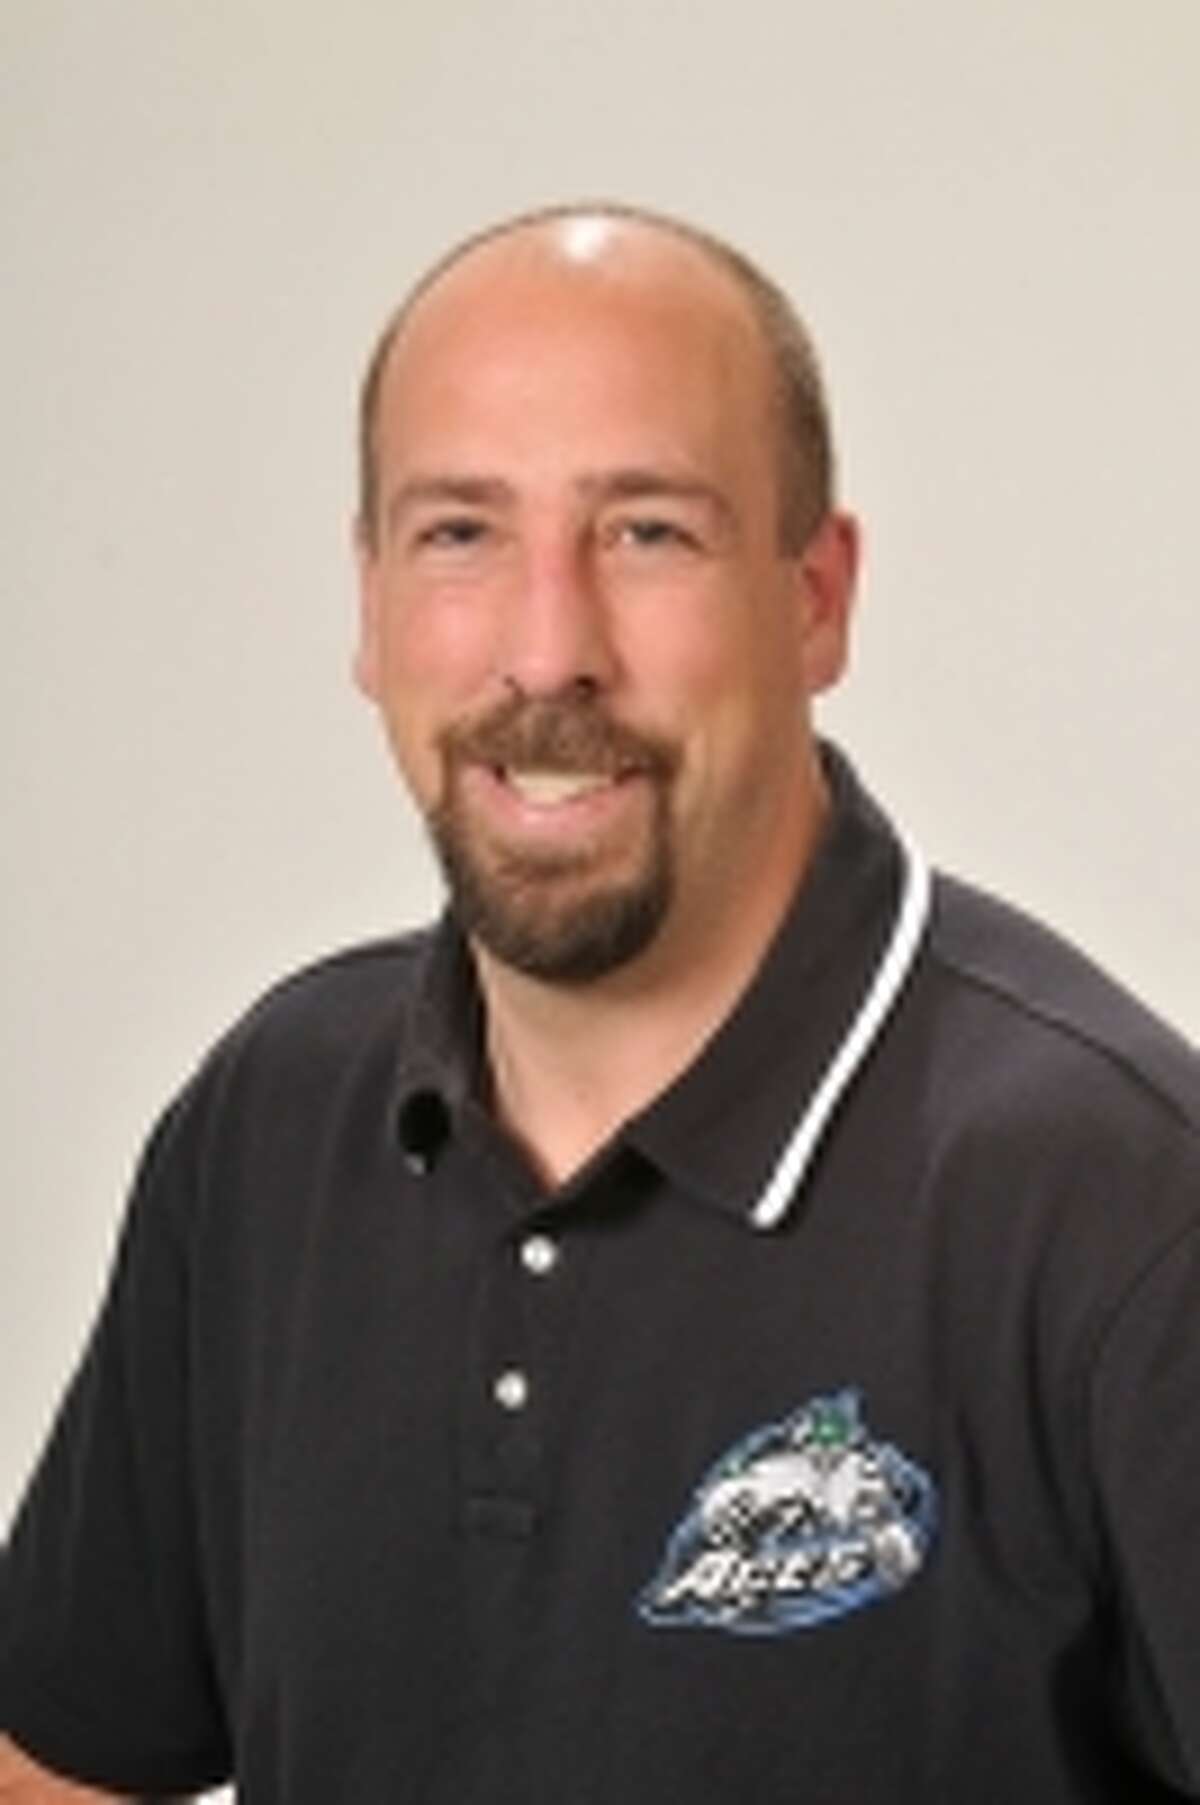 Brent Thompson was named Bridgeport Sound Tigers head coach June 28, 2011. He had previously won the 2011 ECHL title with the Alaska Aces.